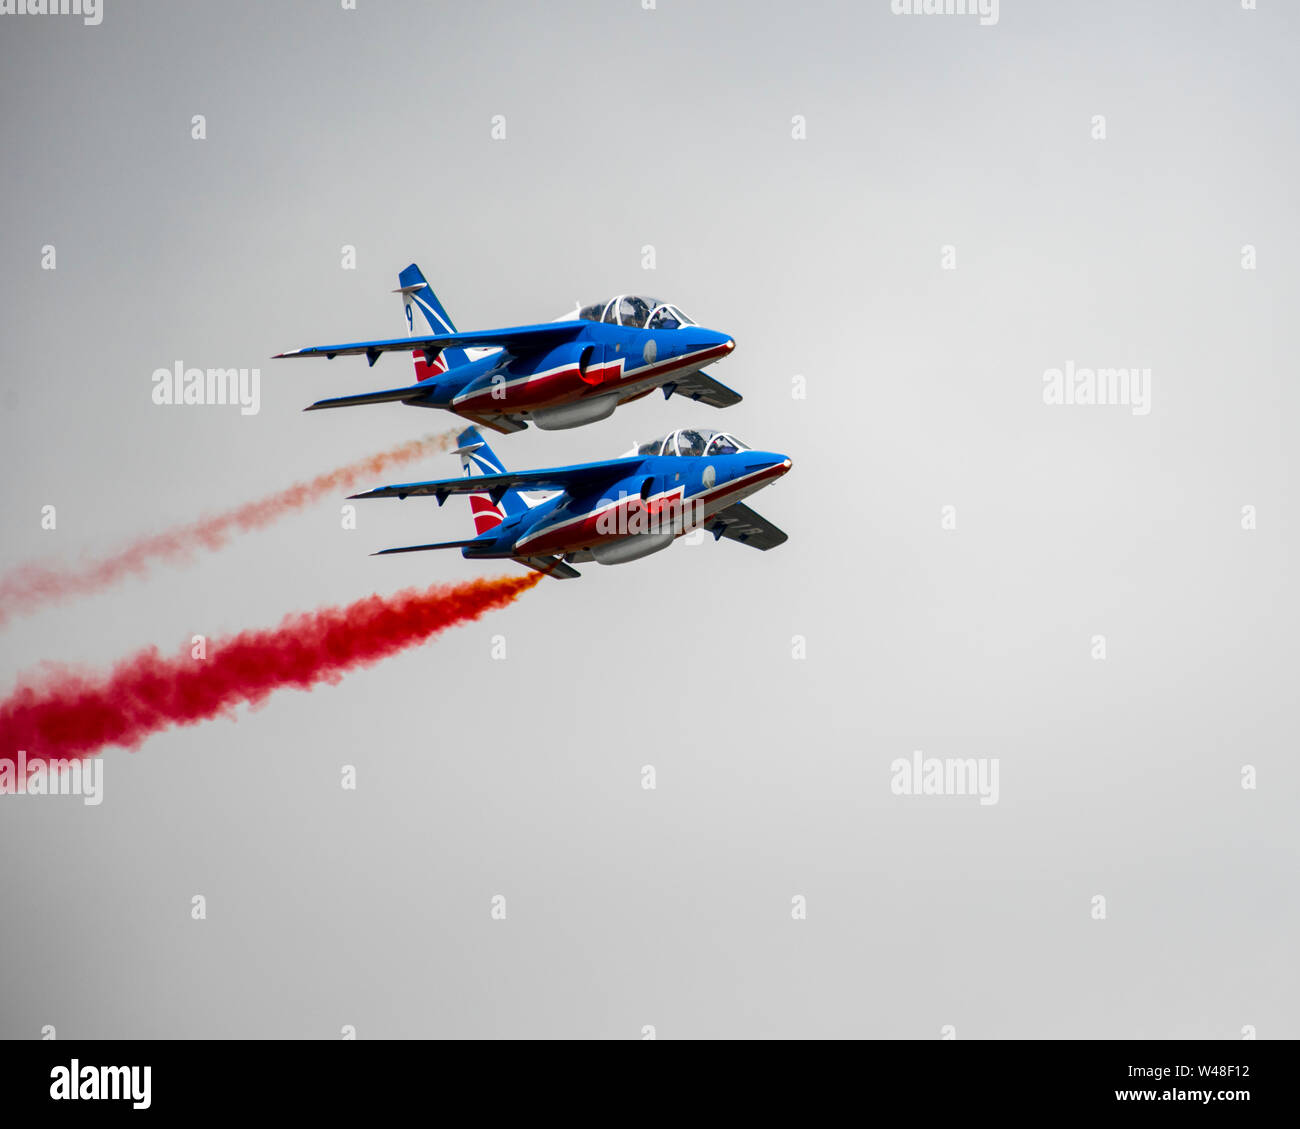 Two members of the French Air Force’s Patrouille de France fly in close formation during the 2019 Royal International Air Tattoo at RAF Fairford, England, July 20, 2019. This year, RIAT commemorated the 70th anniversary of NATO and highlighted the United States' enduring commitment to its European allies. (U.S. Air Force photo by Tech Sgt. Aaron Thomasson) Stock Photo